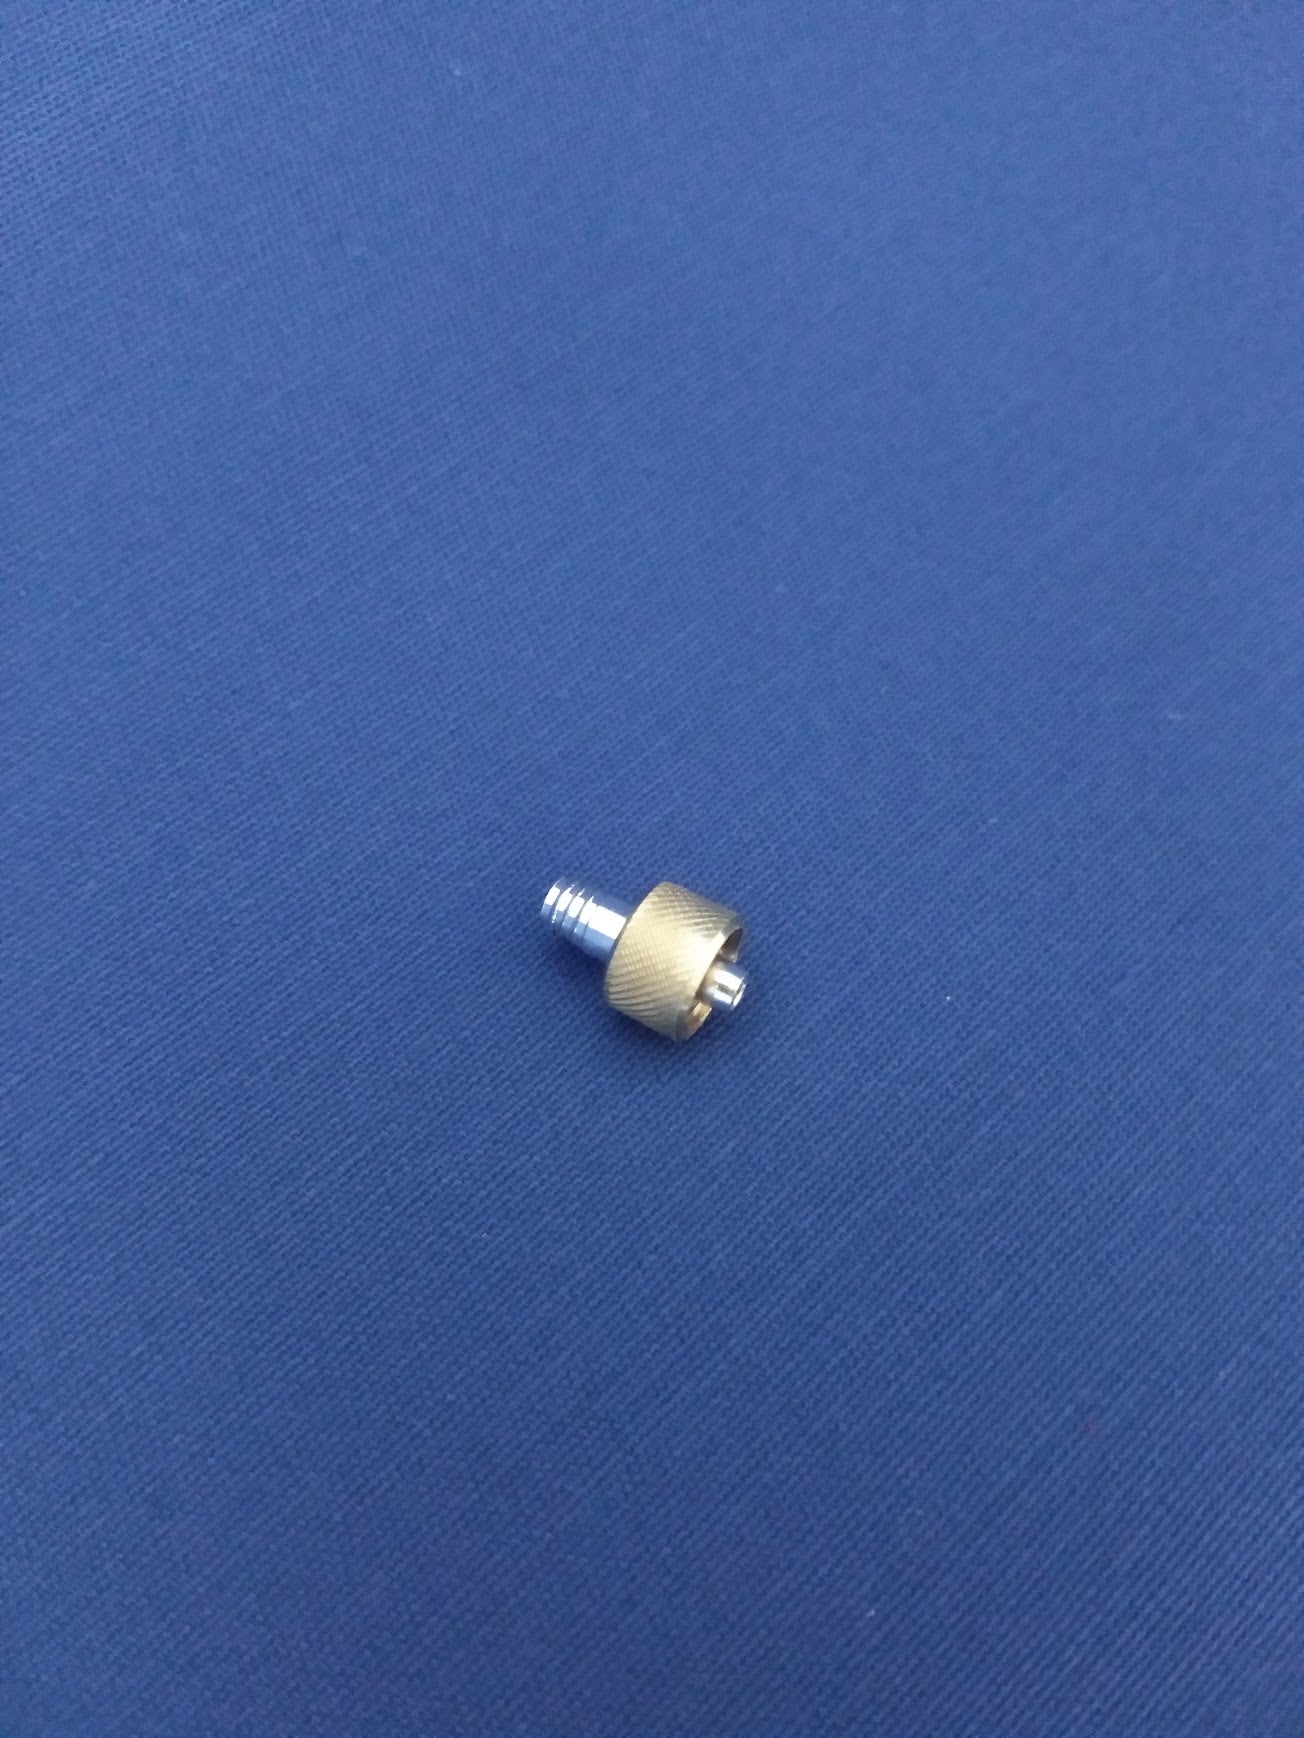 Threaded Barb Fitting